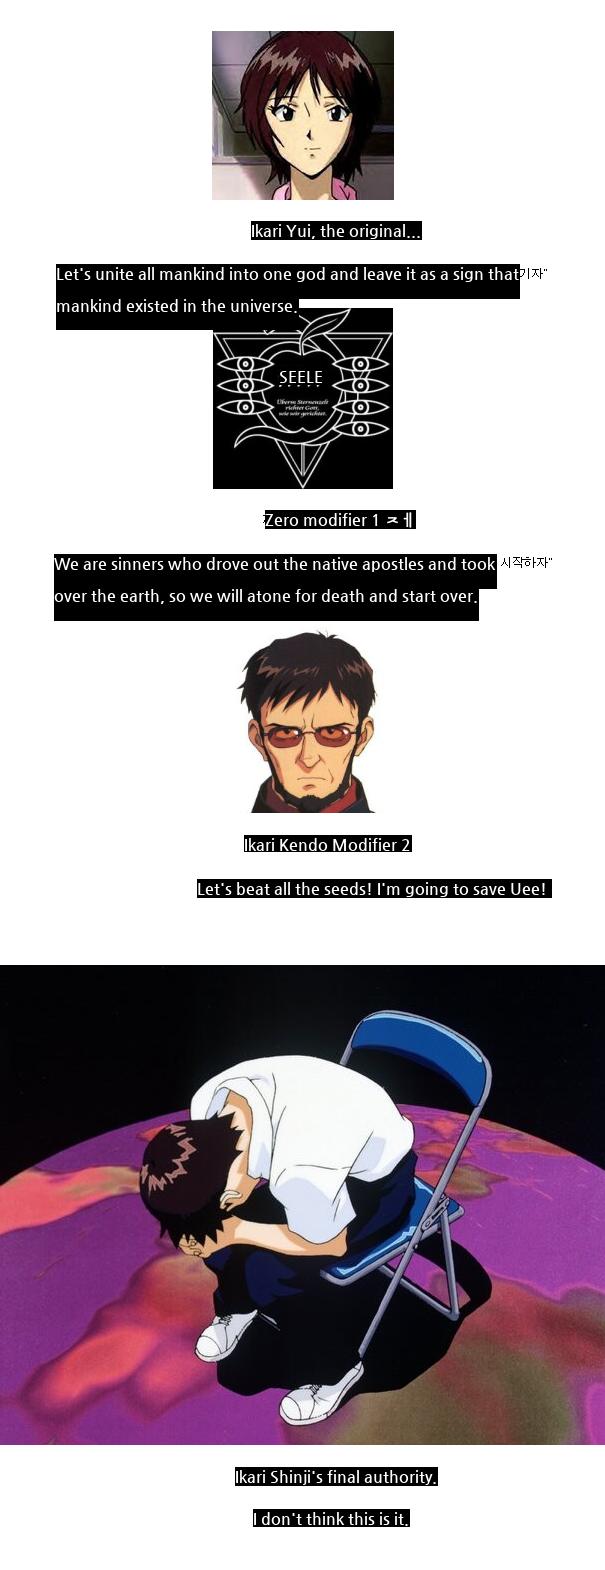 Summary of Evangelion's Human Complementary Plan